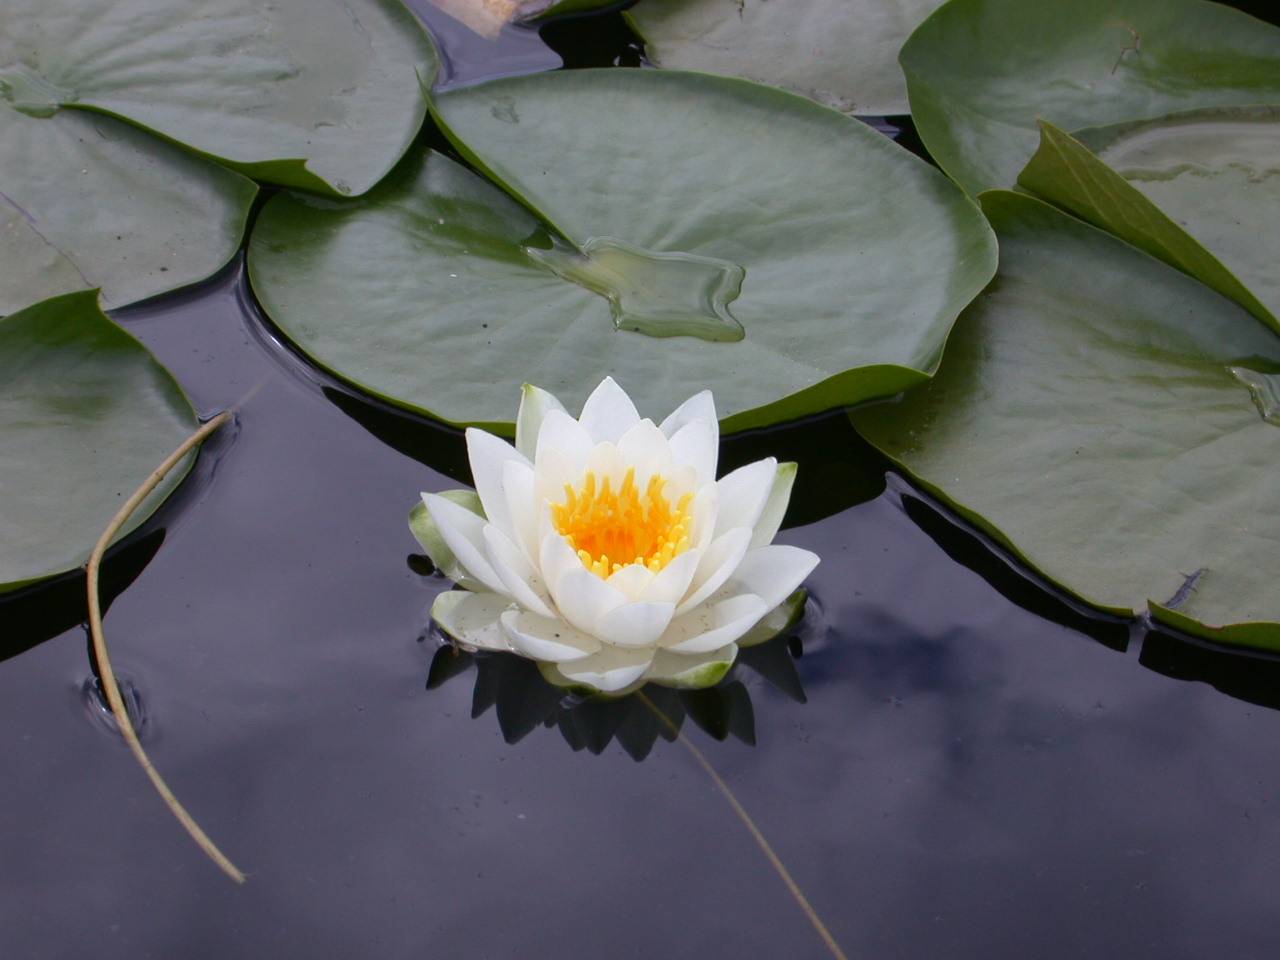 Flower HD Wallpaper, Image, PIctures, Tattoos and Desktop Background, White Lotus Flower